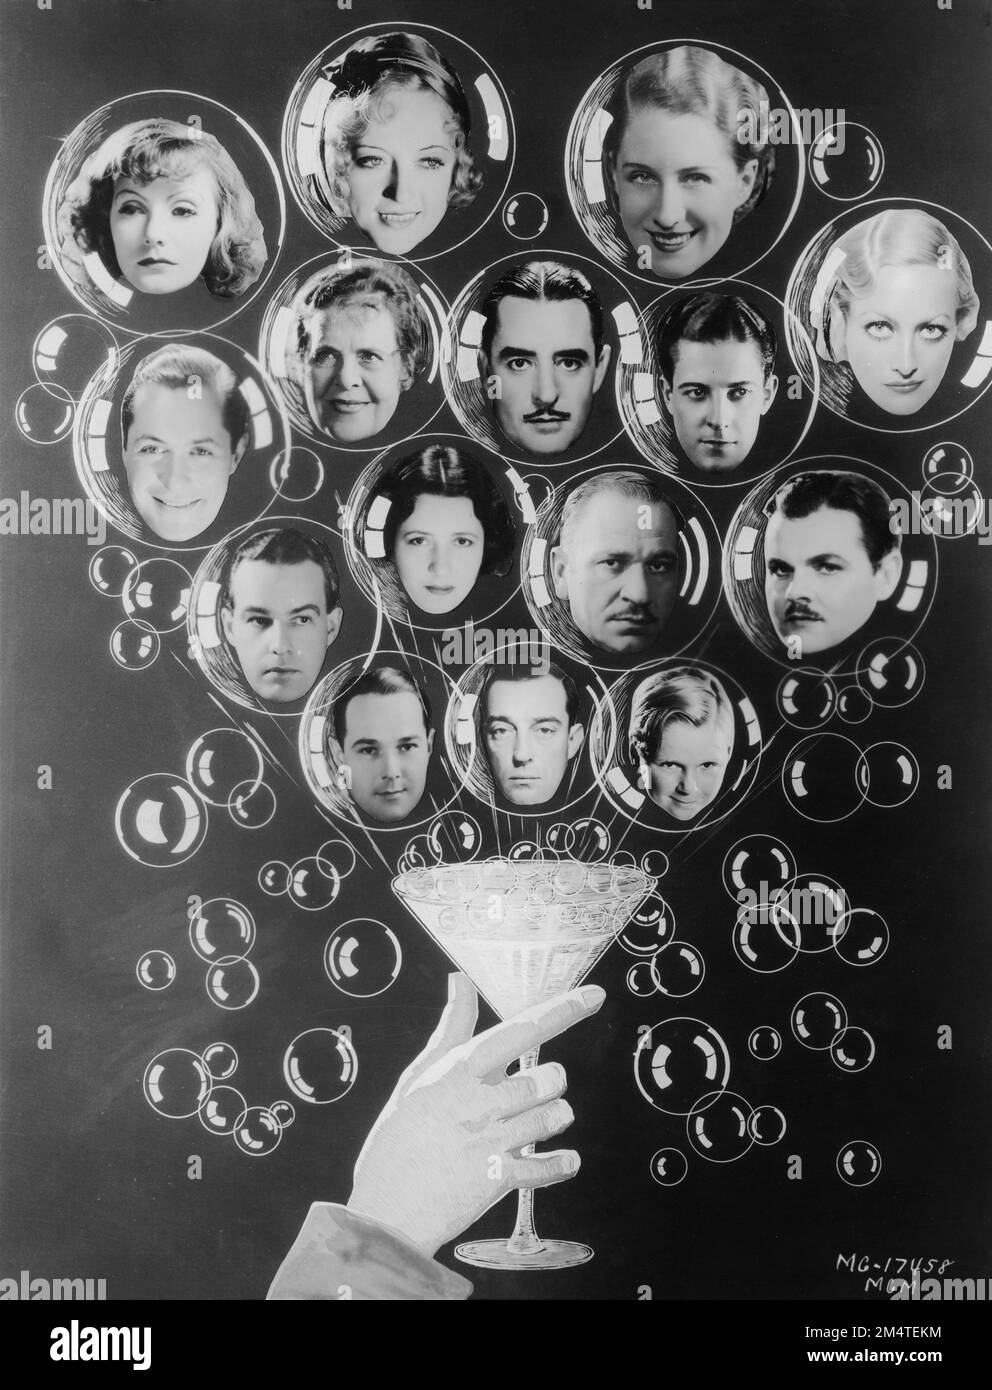 Collage of MGM Movie Stars from 1931 with from top left : GRETA GARBO, MARION DAVIES NORMA SHEARER, ROBERT MONTGOMERY, MARIE DRESSLER, JOHN GILBERT, RAMON NOVARRO, ALFRED LUNT, LYNN FONTANNE, WALLACE BEERY, LAWRENCE TIBBETT, WILLIAM HAINES, BUSTER KEATON und JACKIE COOPER Publicity für Metro Goldwyn Mayer Stockfoto